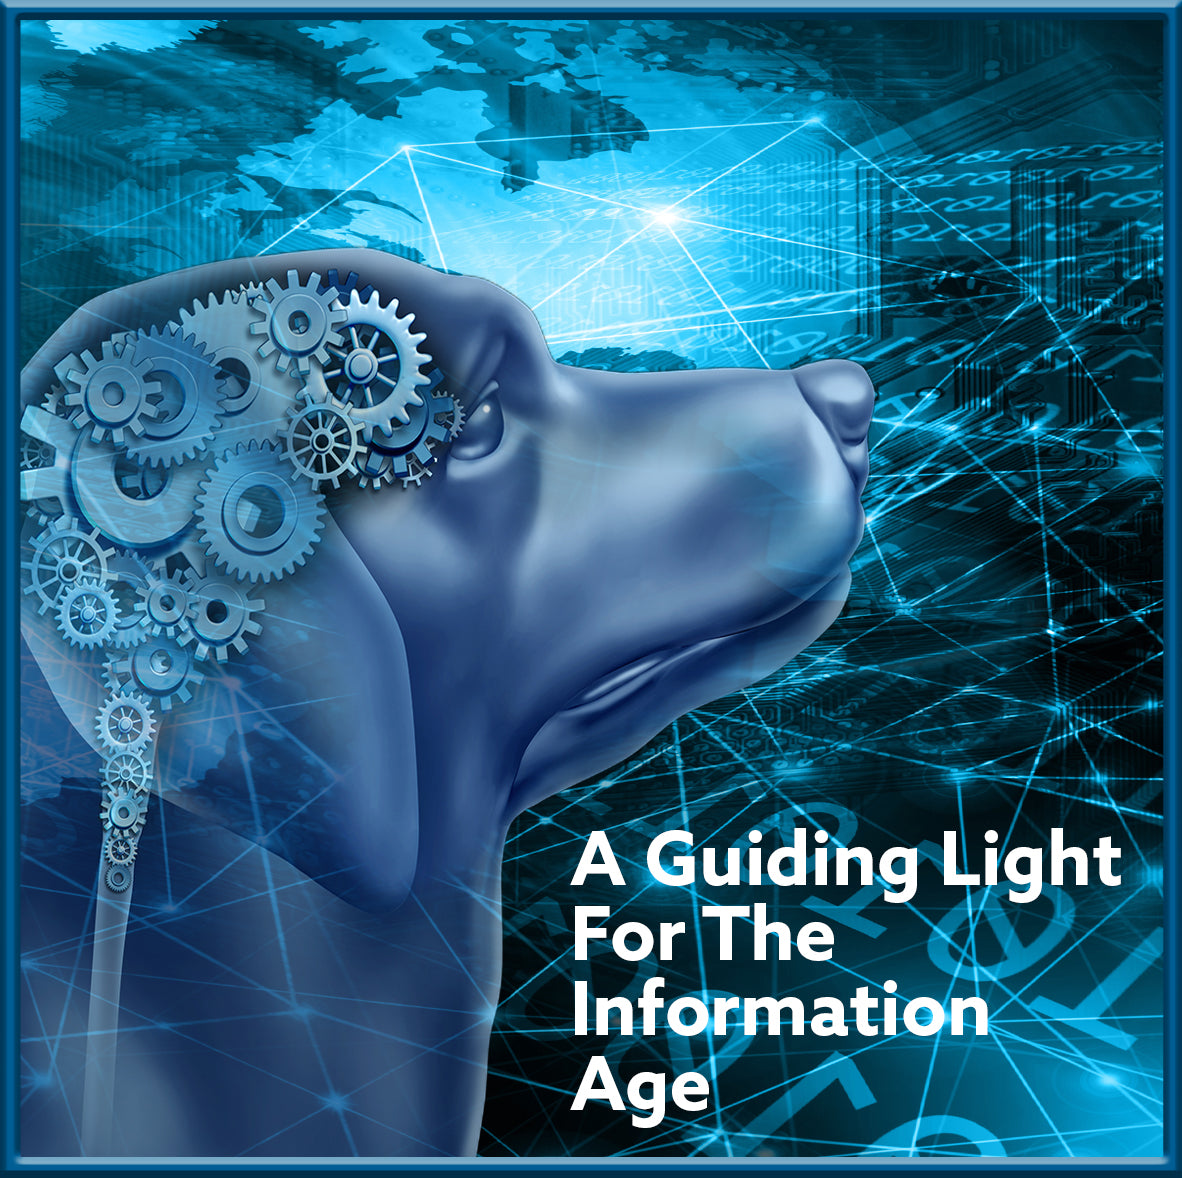 A Guiding Light For The Age of Information